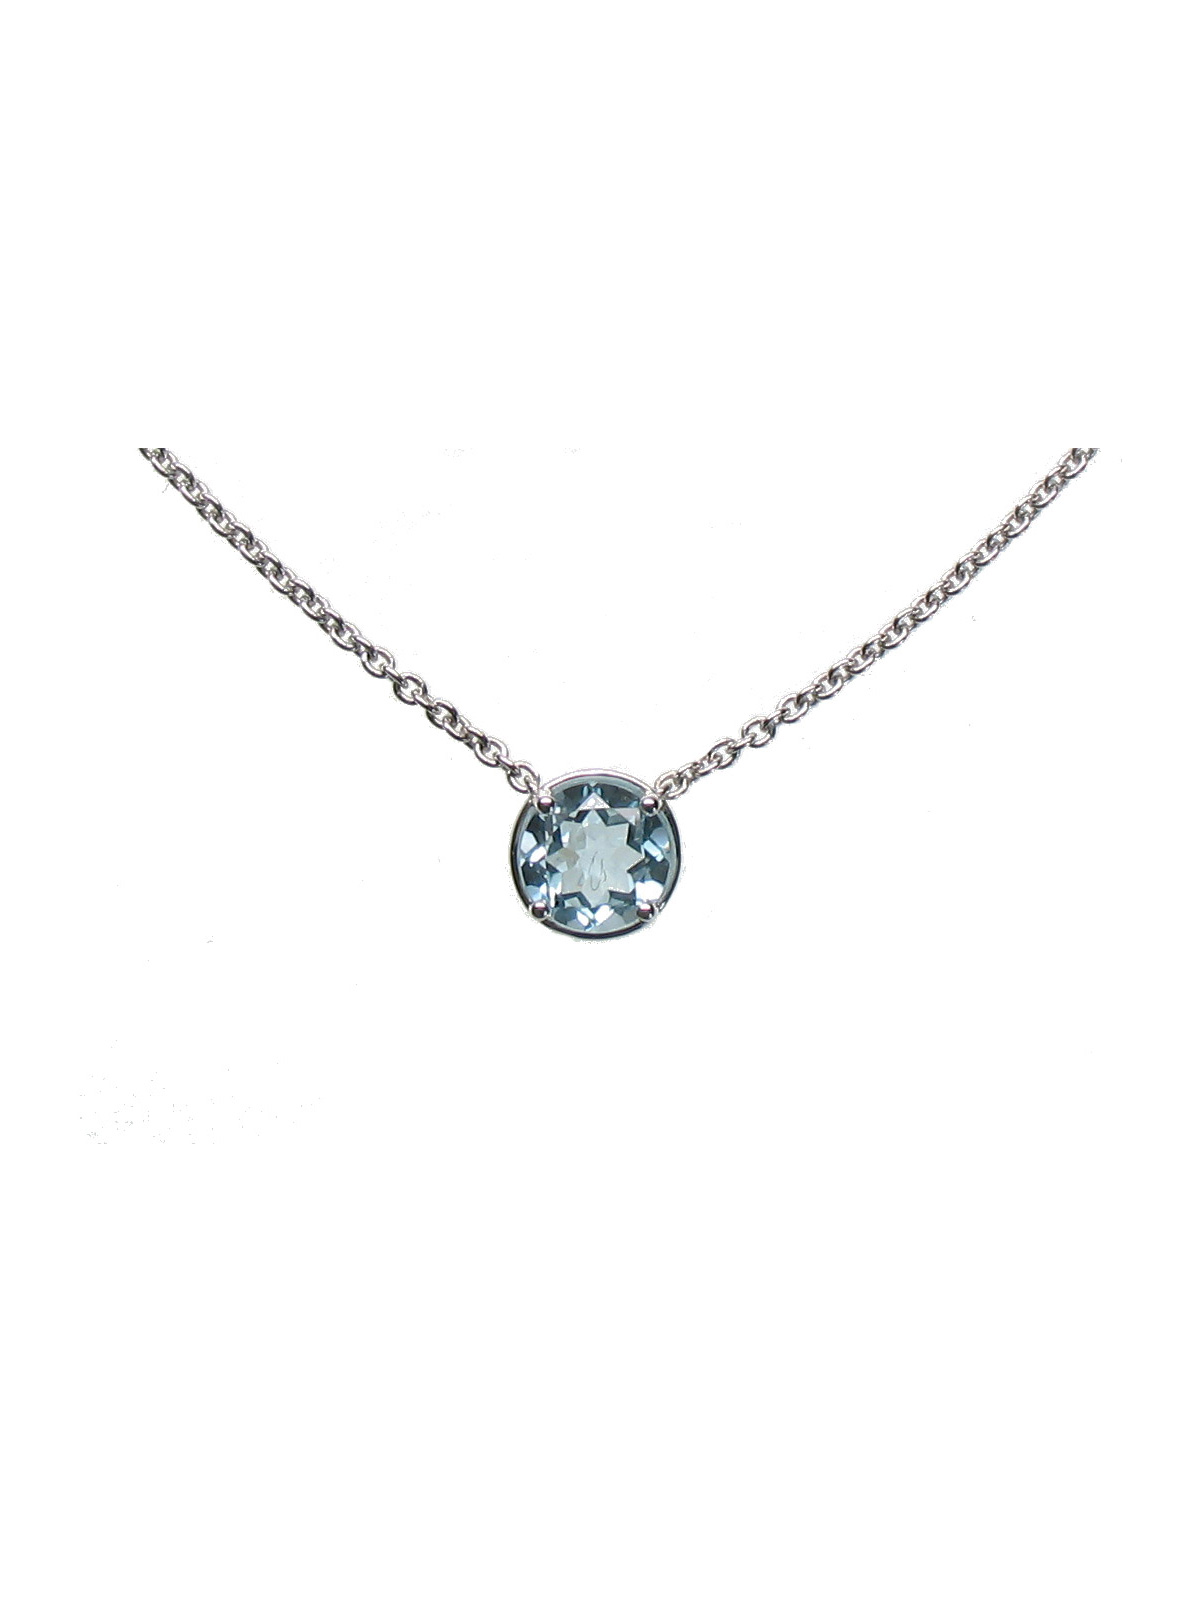 925 silver pendant with Sky blue topaz in 2.61 cts bright size